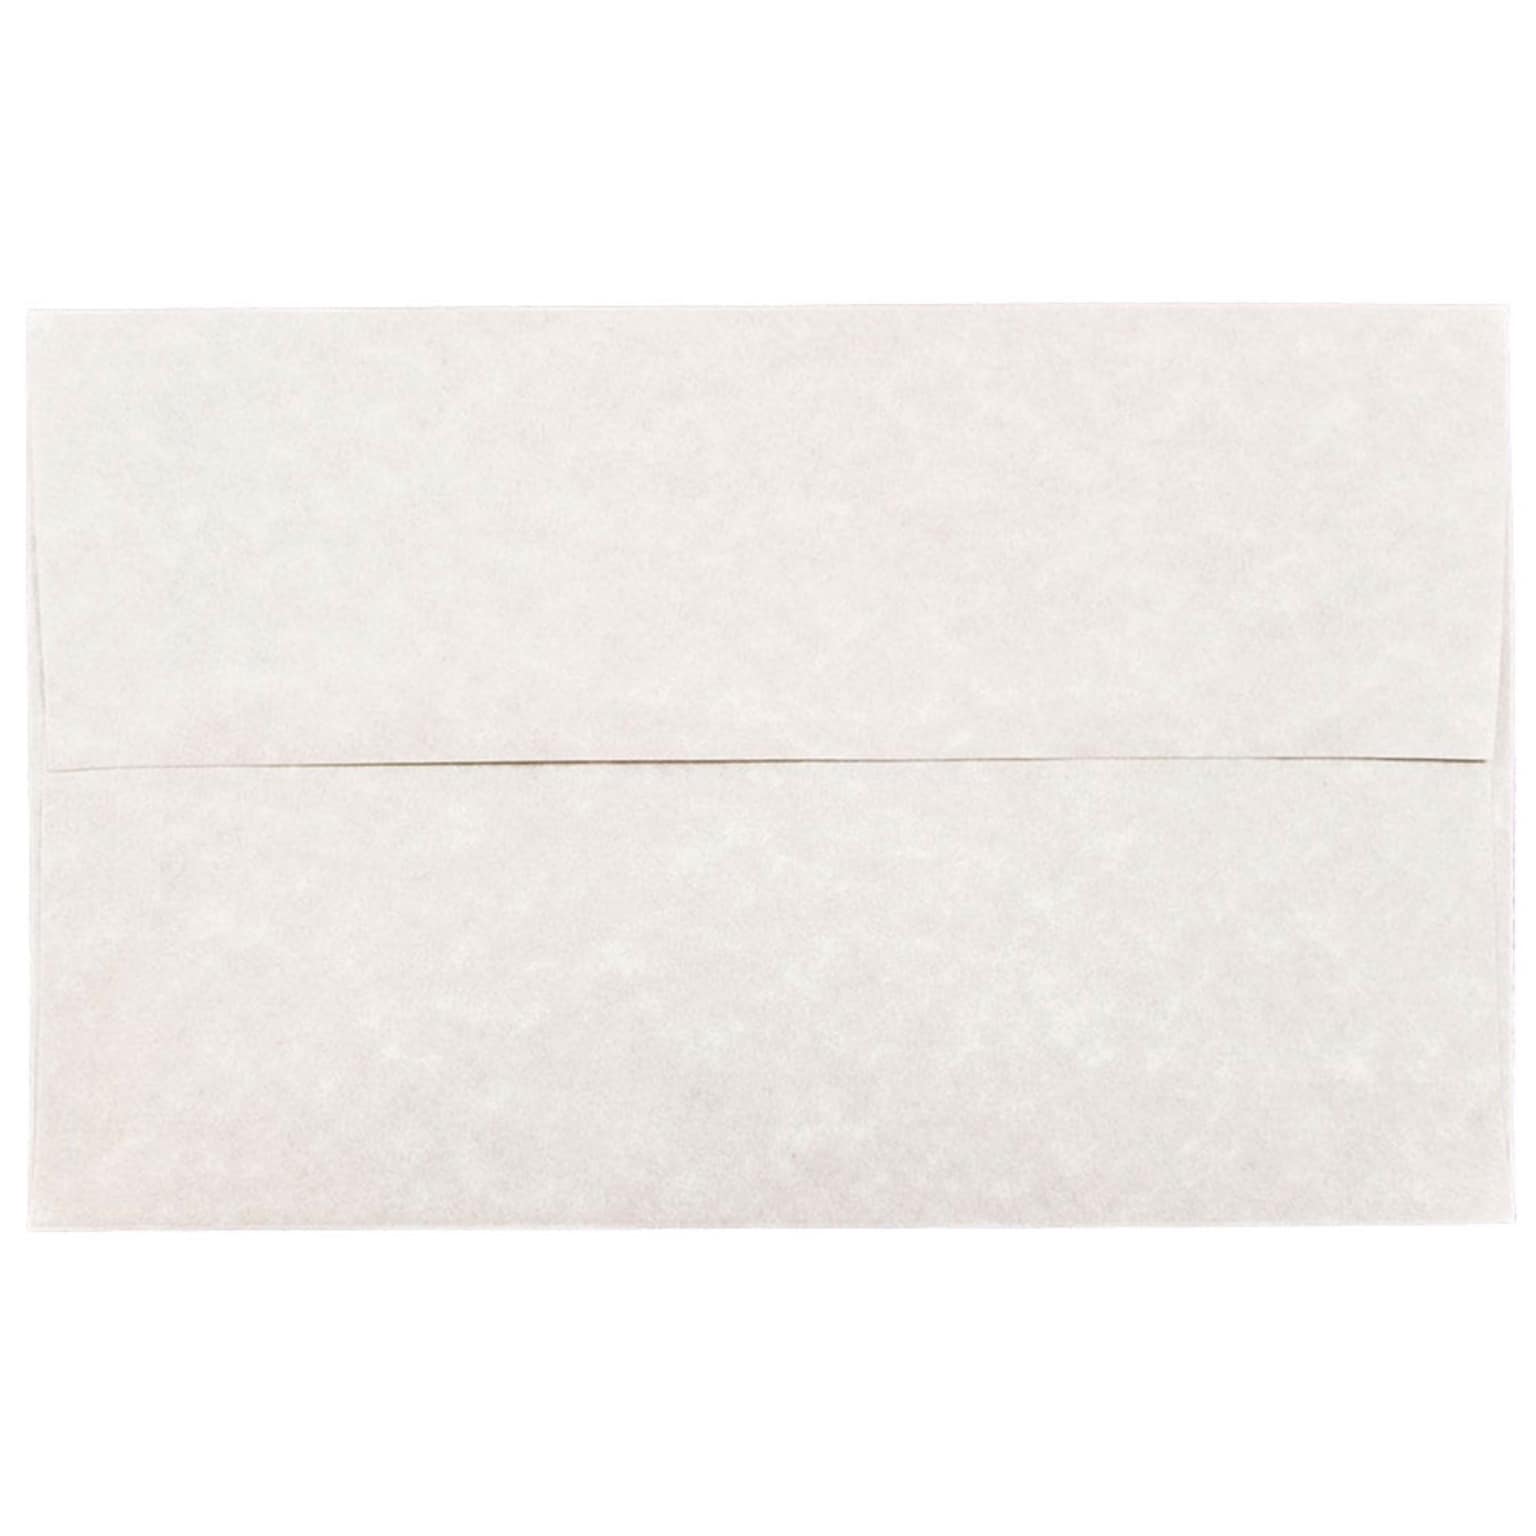 JAM Paper A10 Parchment Invitation Envelopes, 6 x 9.5, Pewter Grey Recycled, 25/Pack (57156)